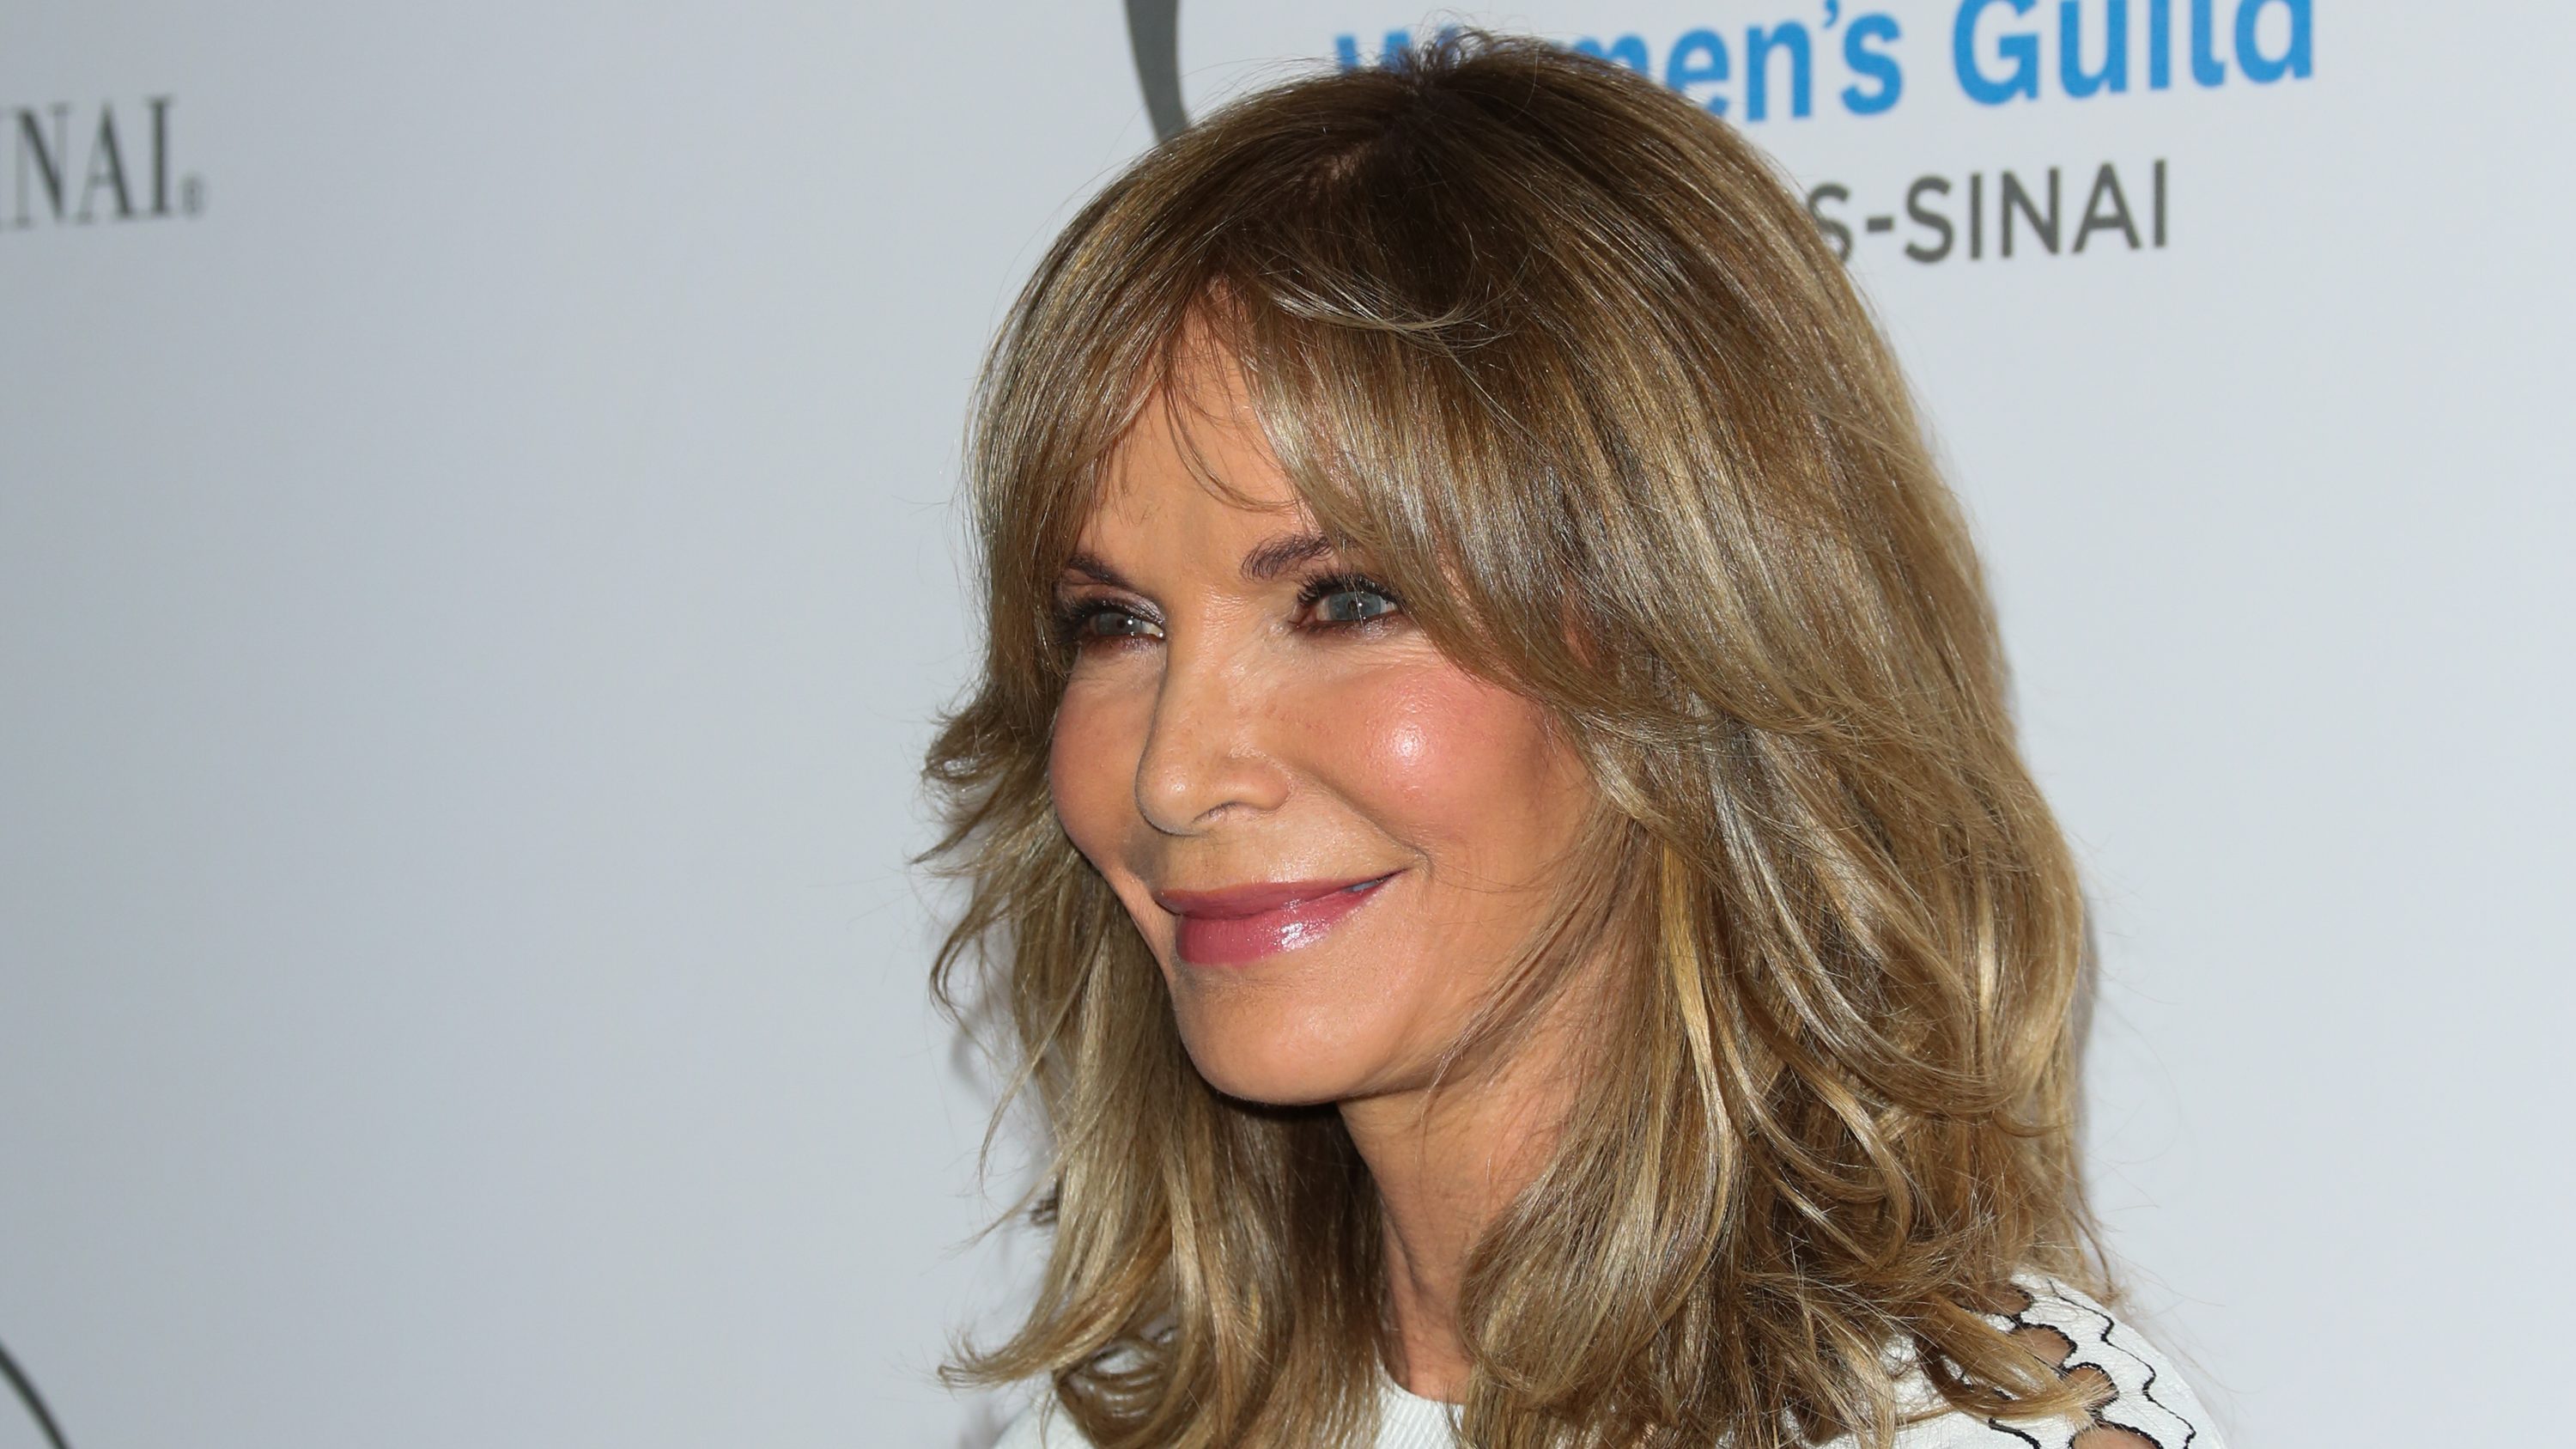 Images of jaclyn smith today